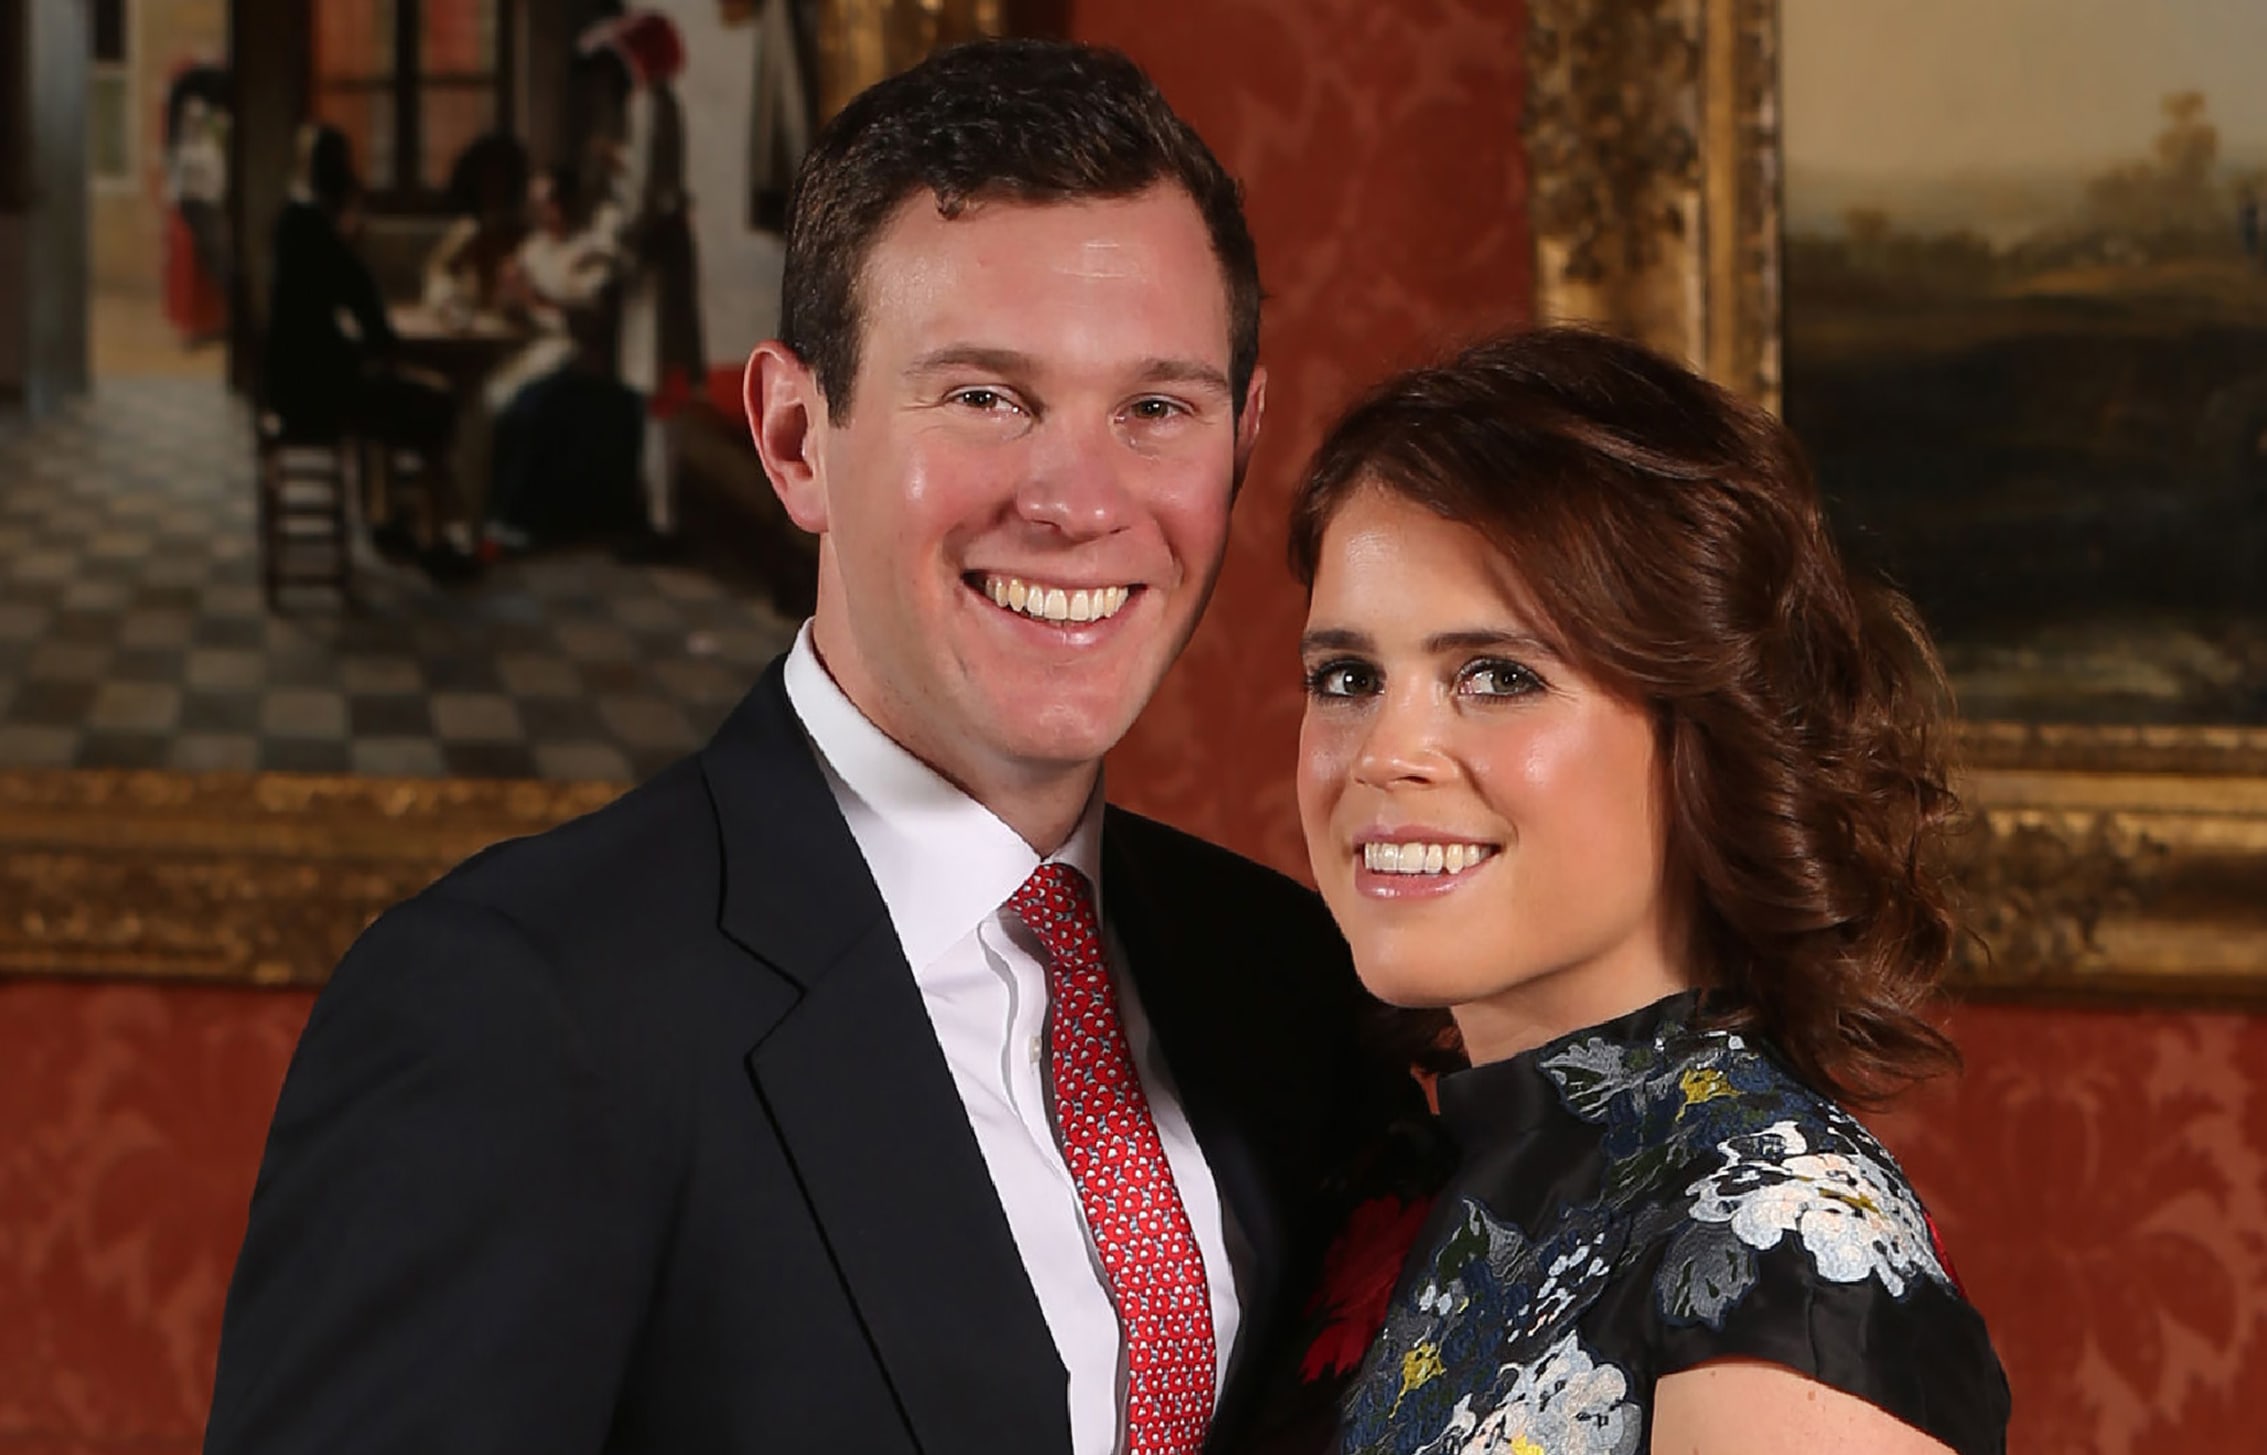 Britain's Princess Eugenie of York poses with her fiance Jack Brooksbank at Buckingham Palace after the announcement of their engagement.